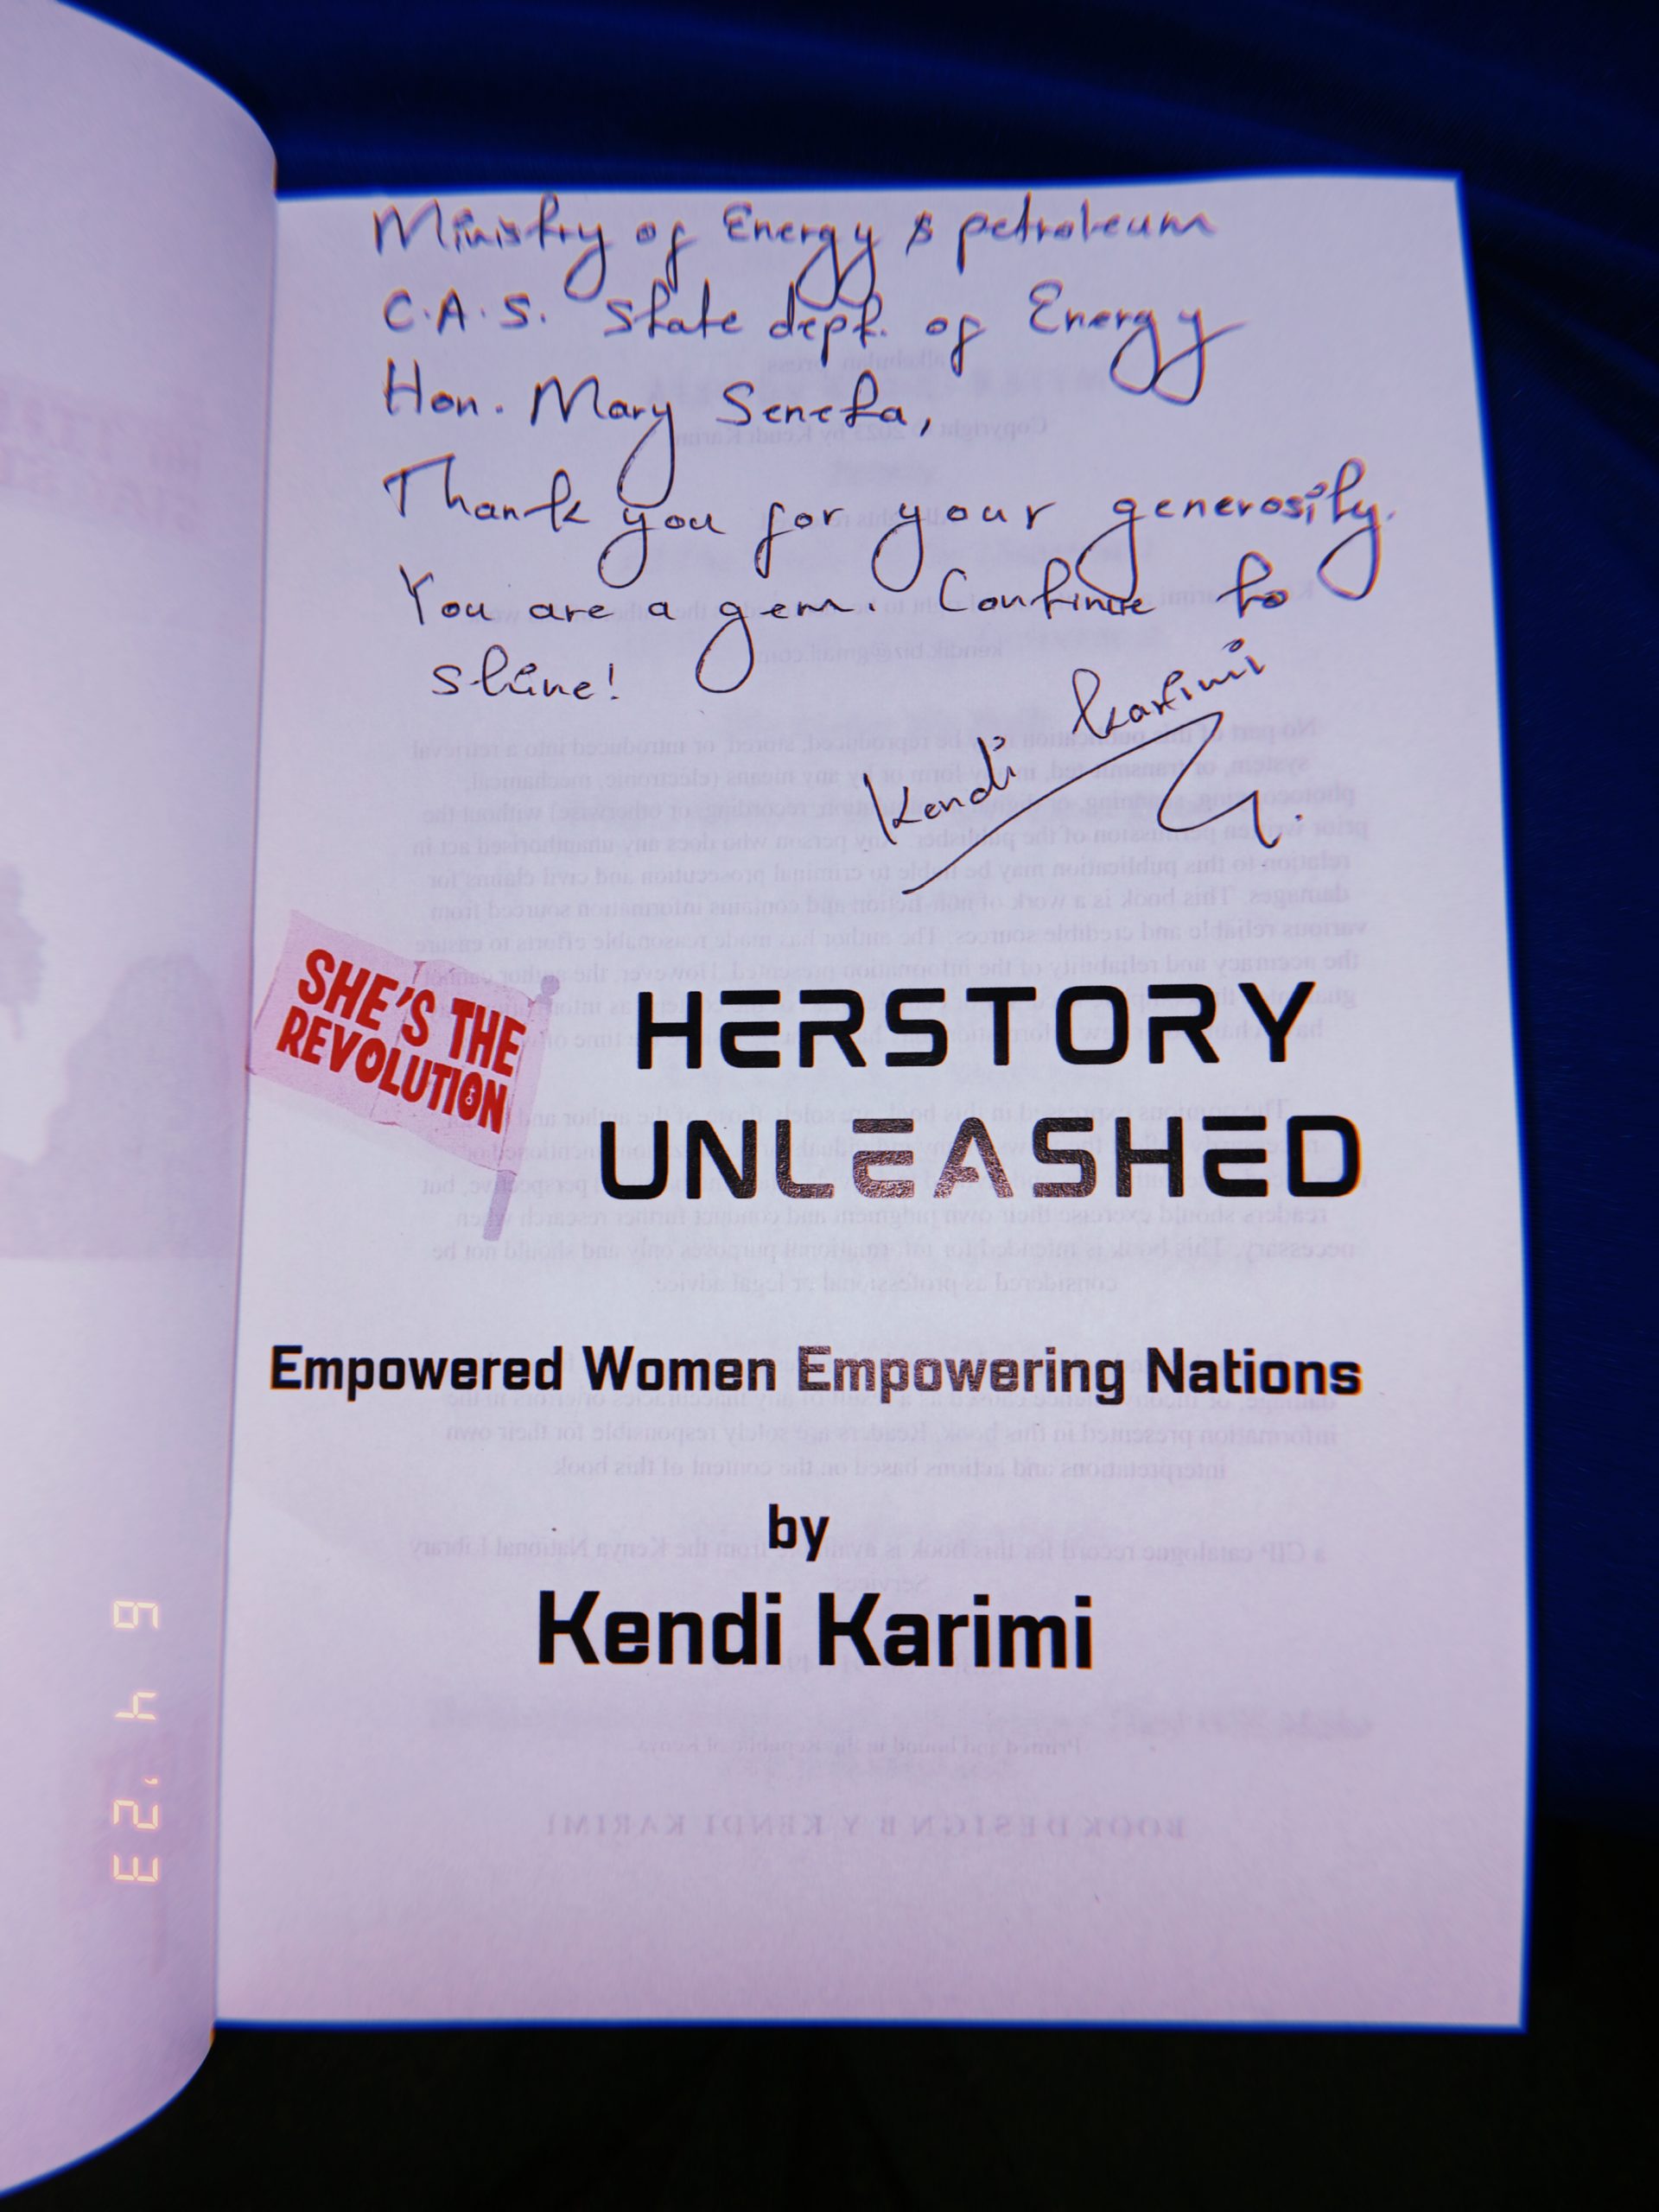 Herstory Unleashed (Empowered Women Empowering Nations) - Kendi Karimi - signed